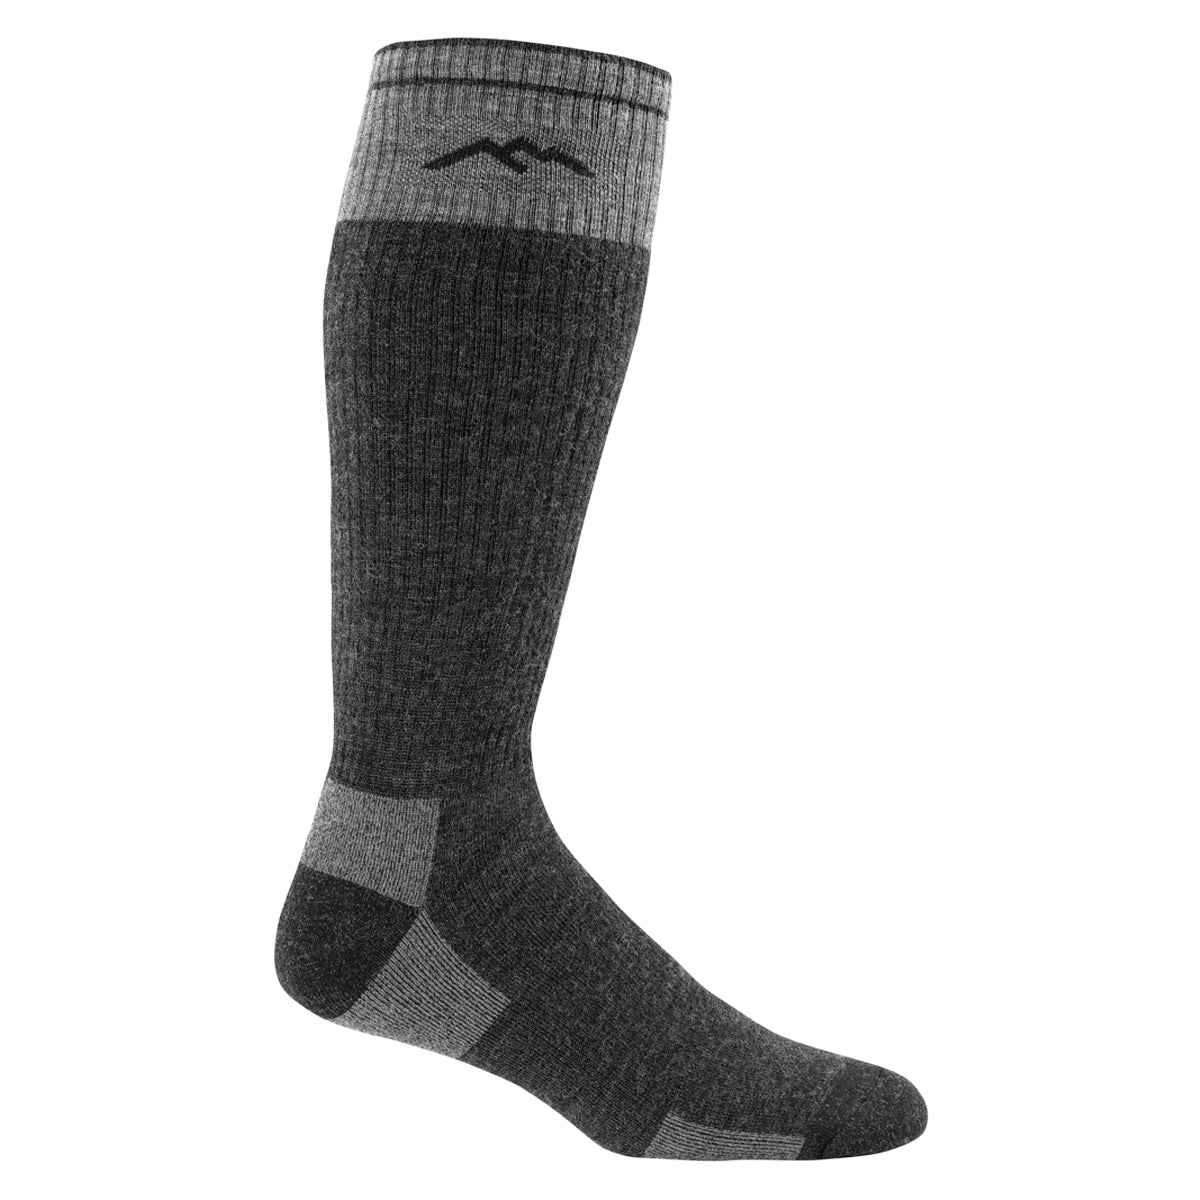 Darn Tough 2013 Men's Over-the-Calf Heavyweight Hunting Sock in Charcoal by GOHUNT | Darn Tough Vermont - GOHUNT Shop